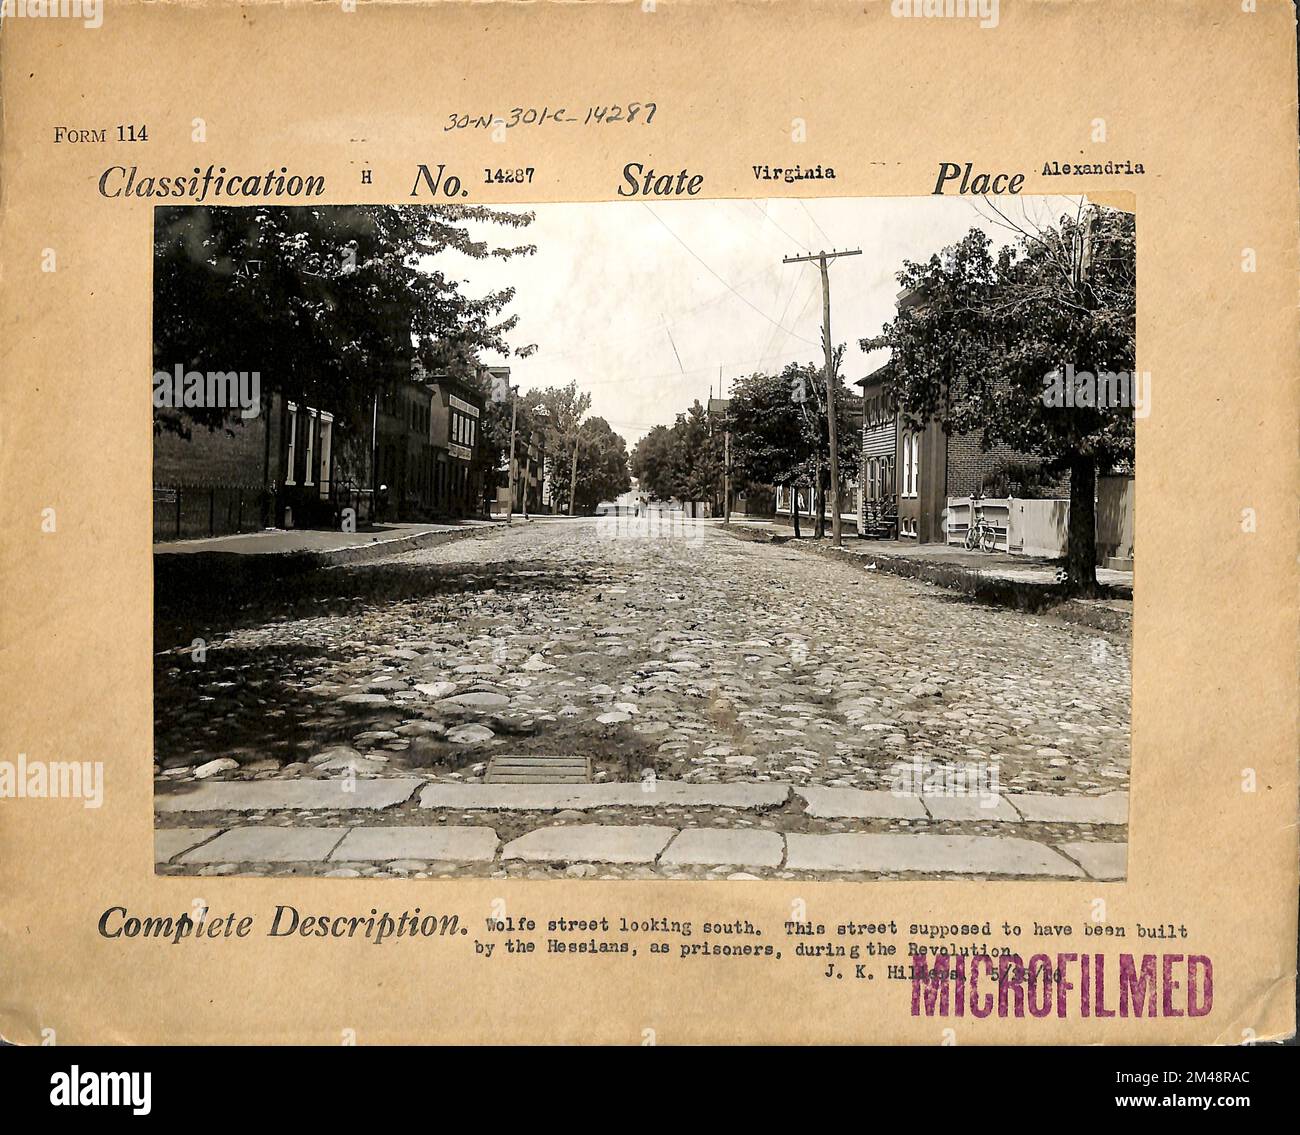 Wolfe Street Looking South. Original caption: Wolfe Street looking south. Supposed to have been built by the Hessians, as prisoners during the Revolution. J. K. Hillers, 5/25/1916. State: Virginia Place: Alexandria. Stock Photo